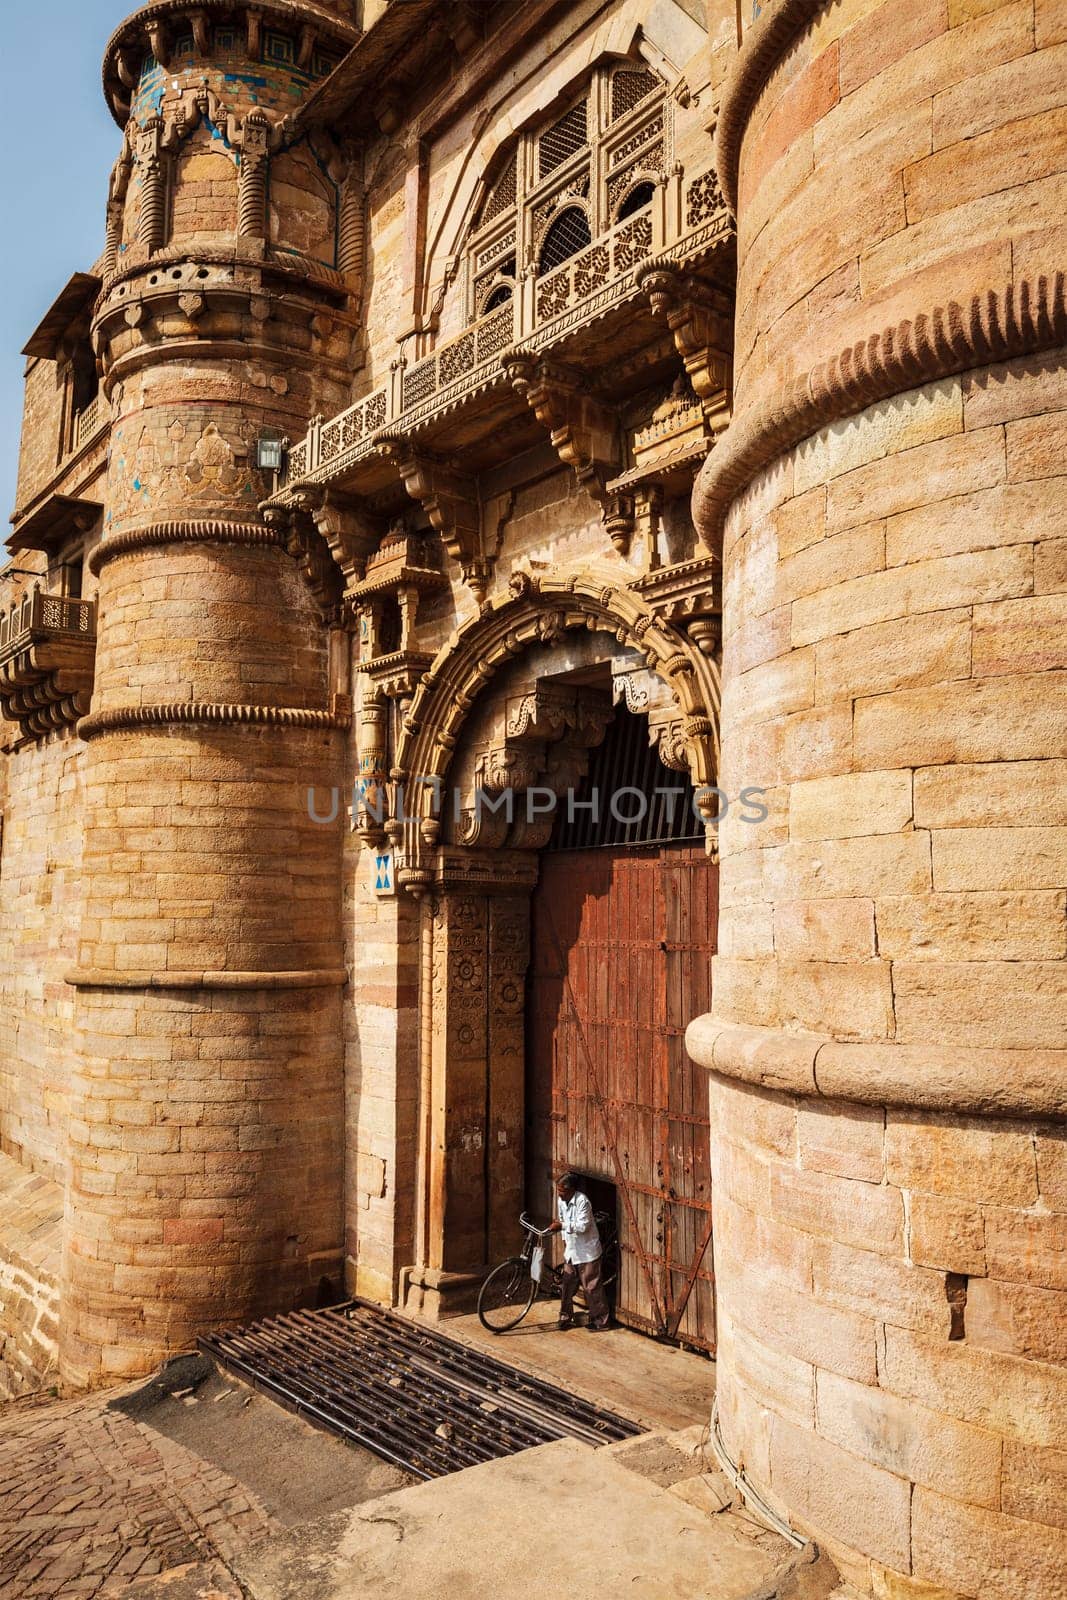 GWALIOR, INDIA - APRIL 11, 2011: Man with bicycle coming through door in huge gates of Gwalior Fort - 8th-century hill fort that houses many historic monuments including palaces, temples and water tanks